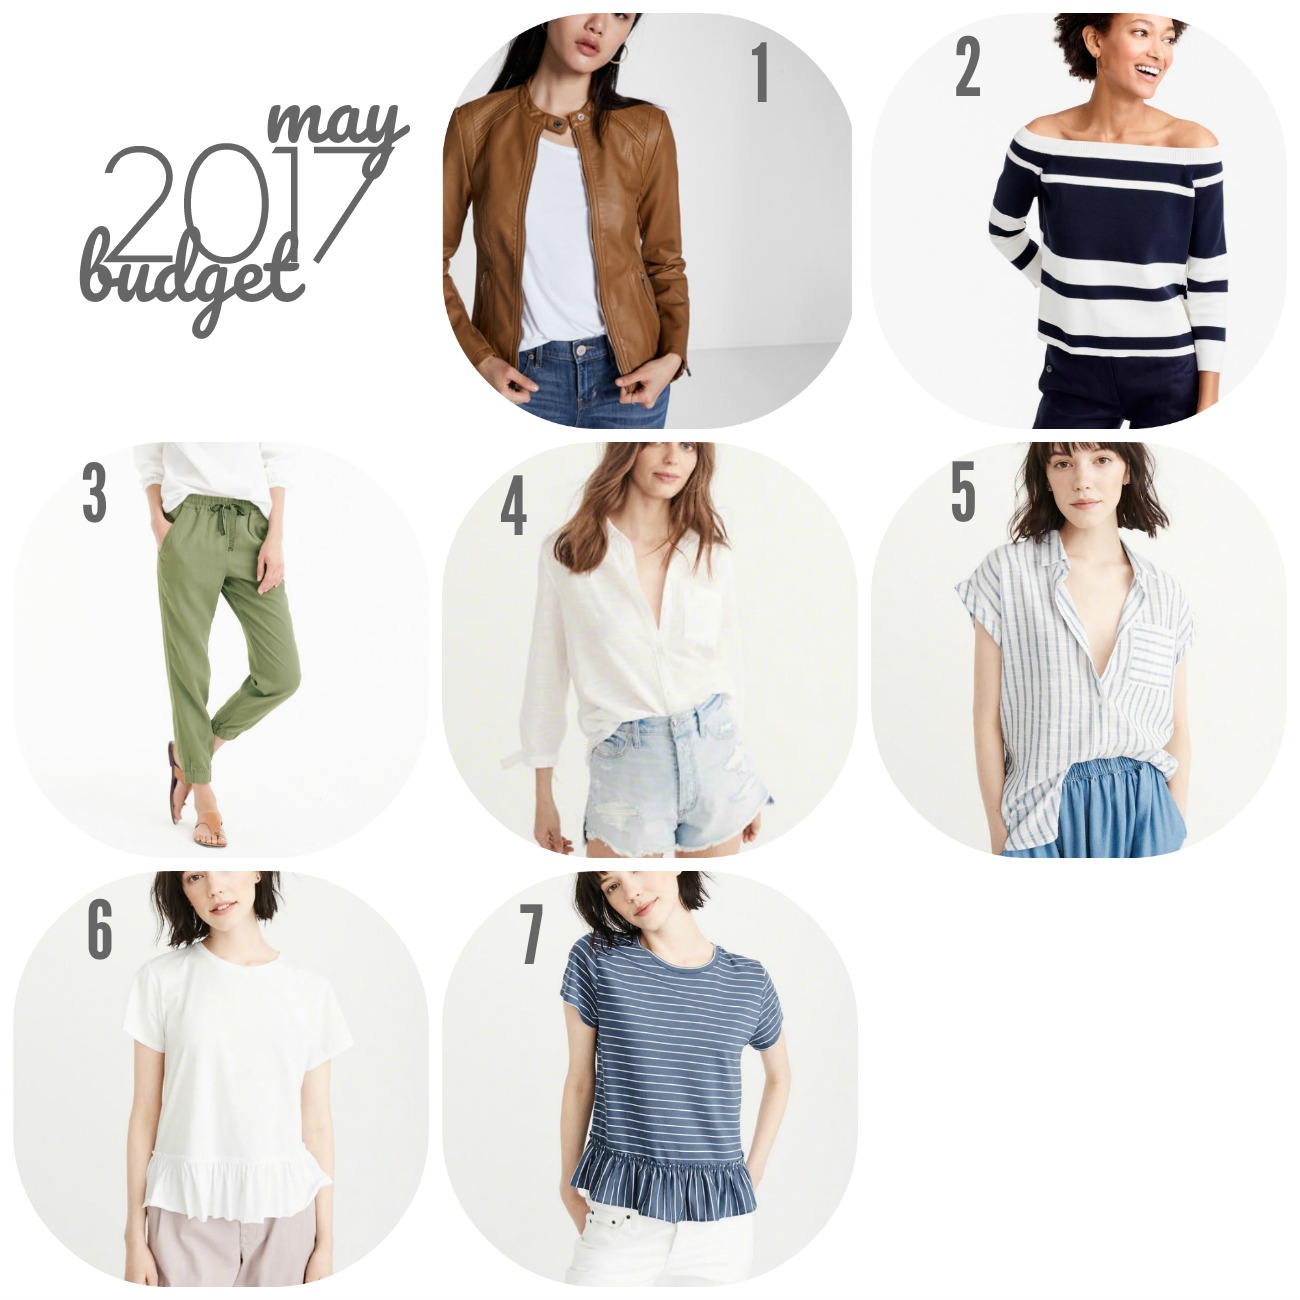 May 2017 Budget | Something Good, J.Crew Factory Edie Leather Loafers Express Double Peplum Minus the Leather Jacket Abercrombie and Fitch Cotton Shirt, White Stripe, XS, Abercrombie and Fitch Tie Sleeve Shirt, XS, J.Crew Off-The-Shoulder Striped Sweater, XS Abercrombie and Fitch Short-Sleeve Peplum Tee (Stripe), XS, Abercrombie and Fitch Short-Sleeve Peplum Tee (White), XS, J.Crew Seaside Pants